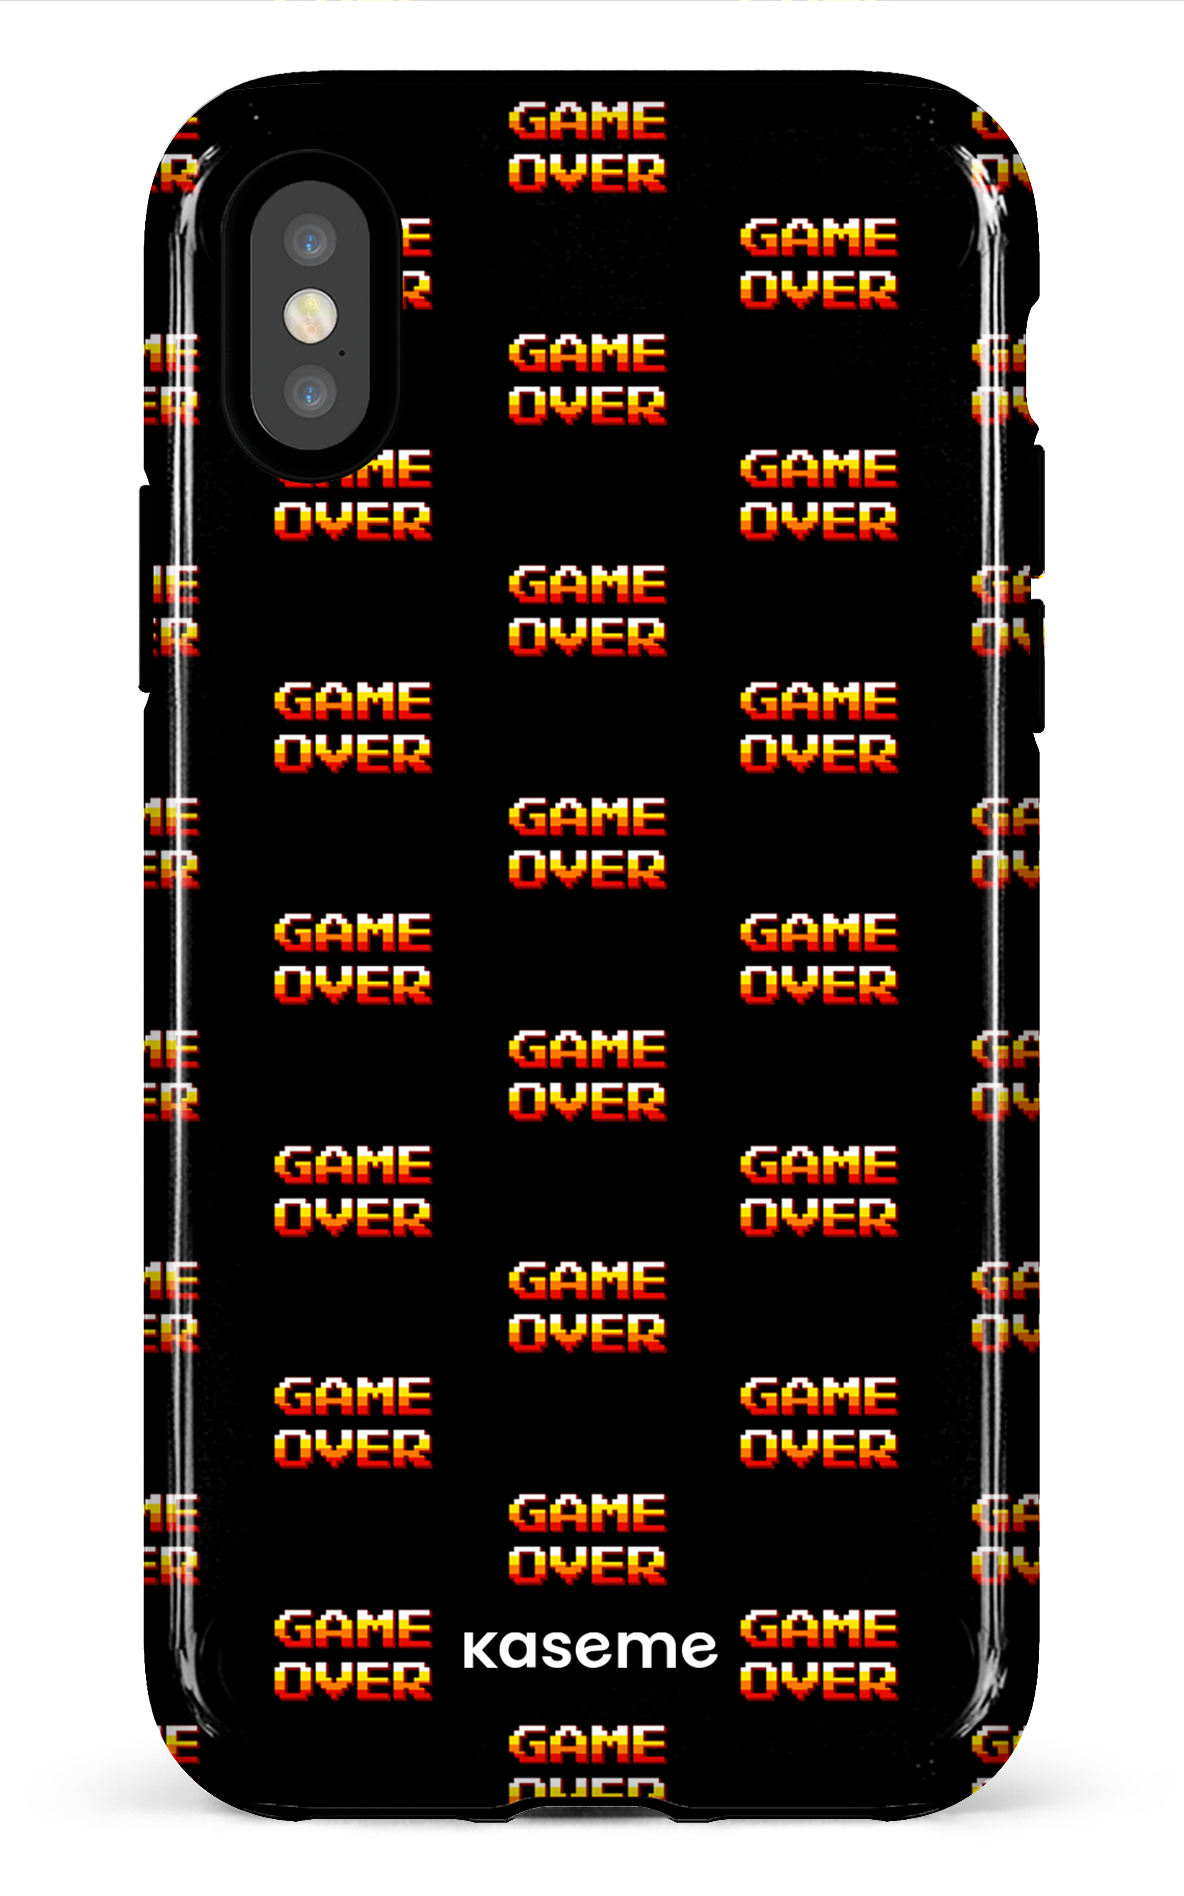 Game Over by Mathieu Pellerin - iPhone X/Xs